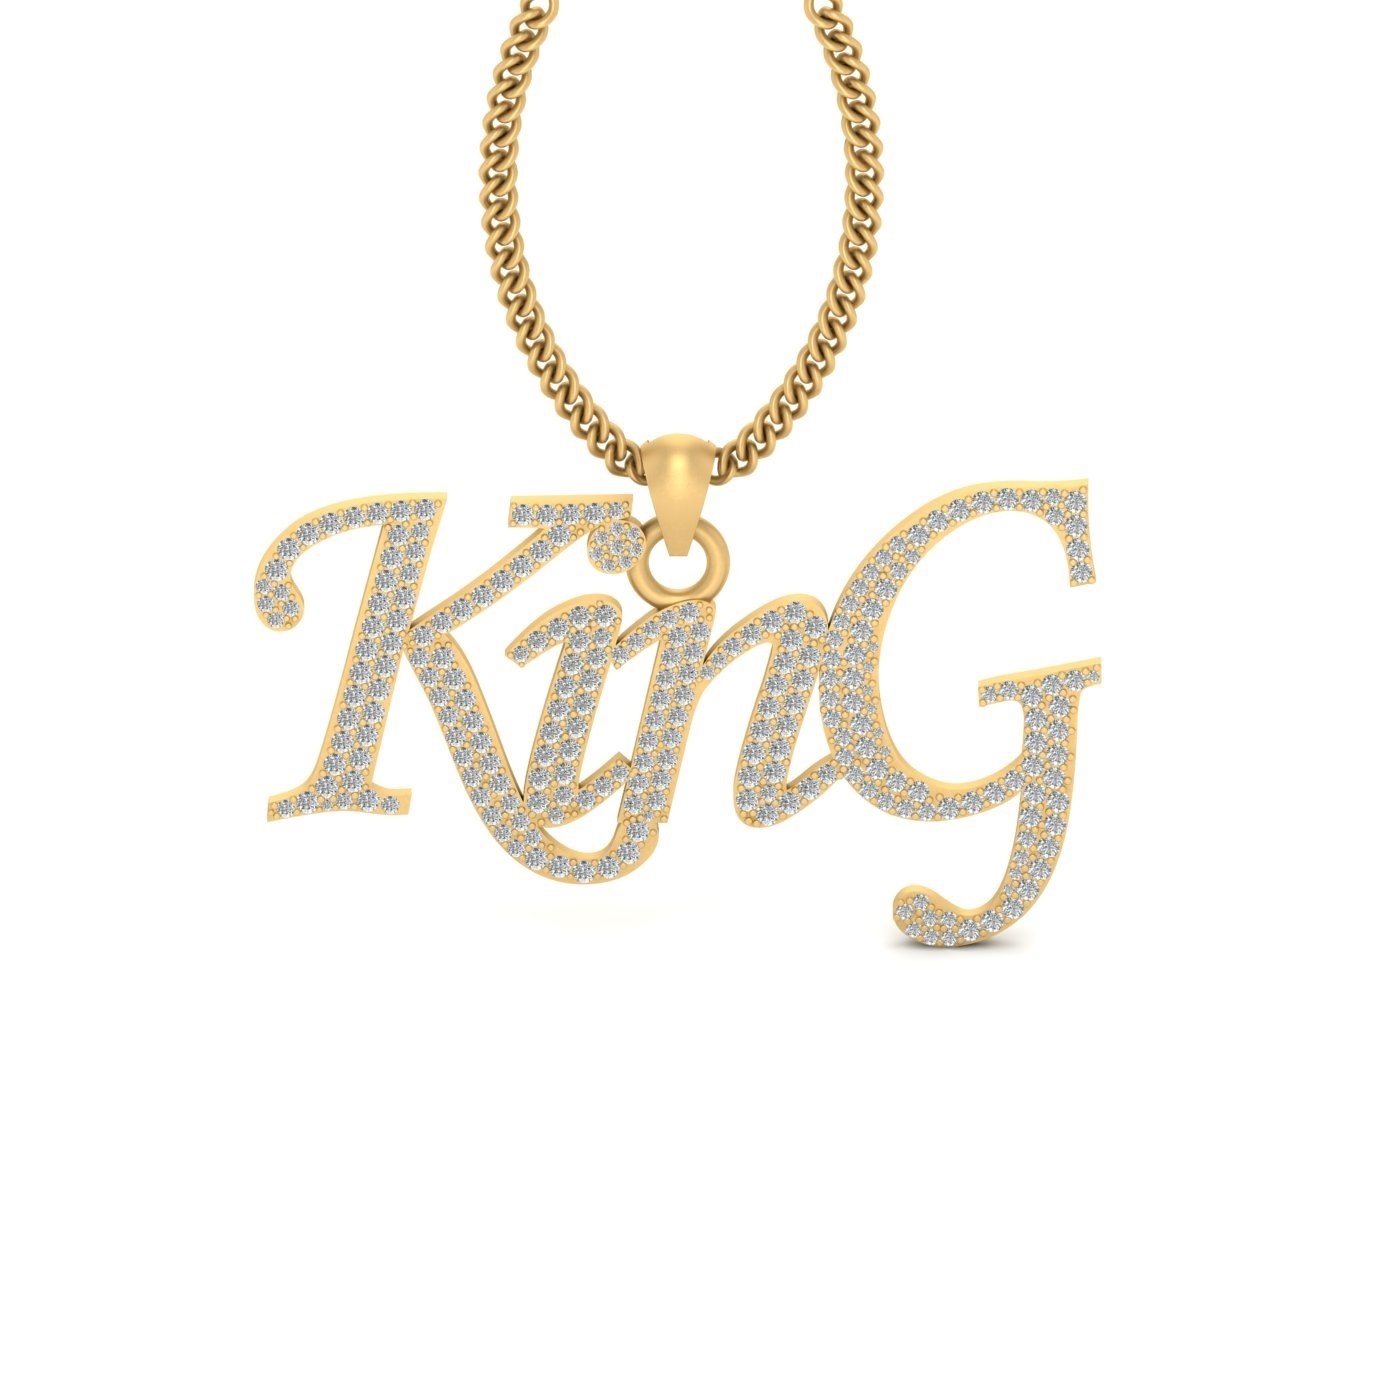 Diamond King Pendant Sterling Silver Hip Hop King Necklace Gold Hip Hop Jewelry